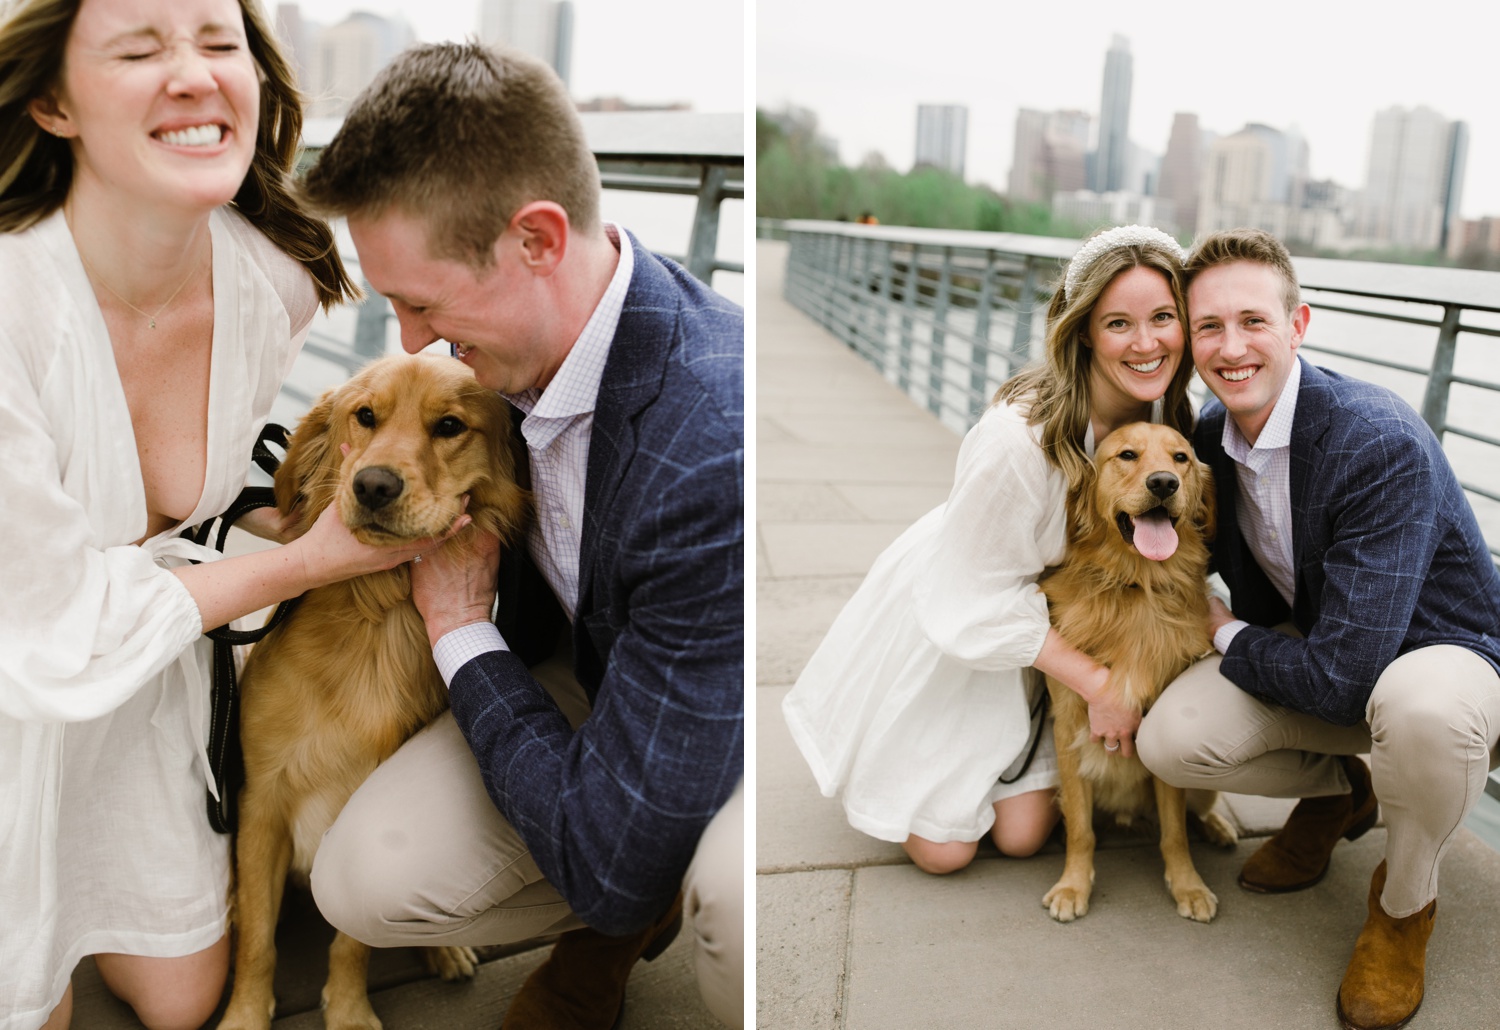 Ideas for engagement photos with your dog